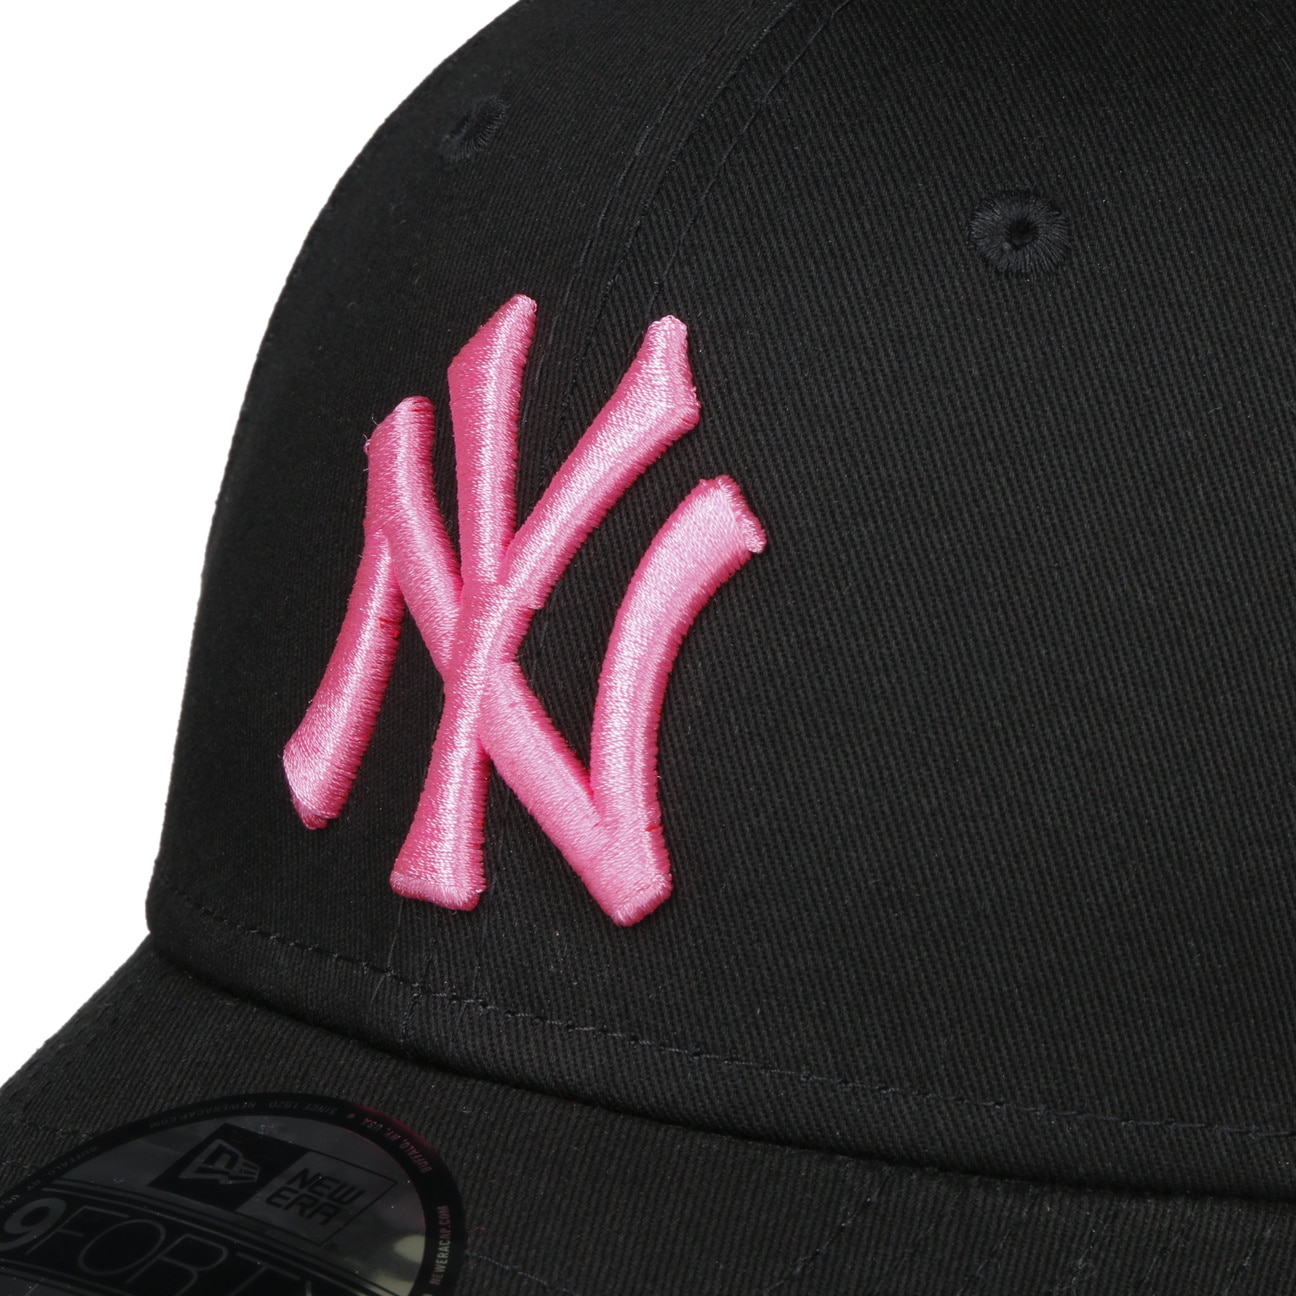 9Forty Neon MLB Yankees Cap - Era New 32,95 € by